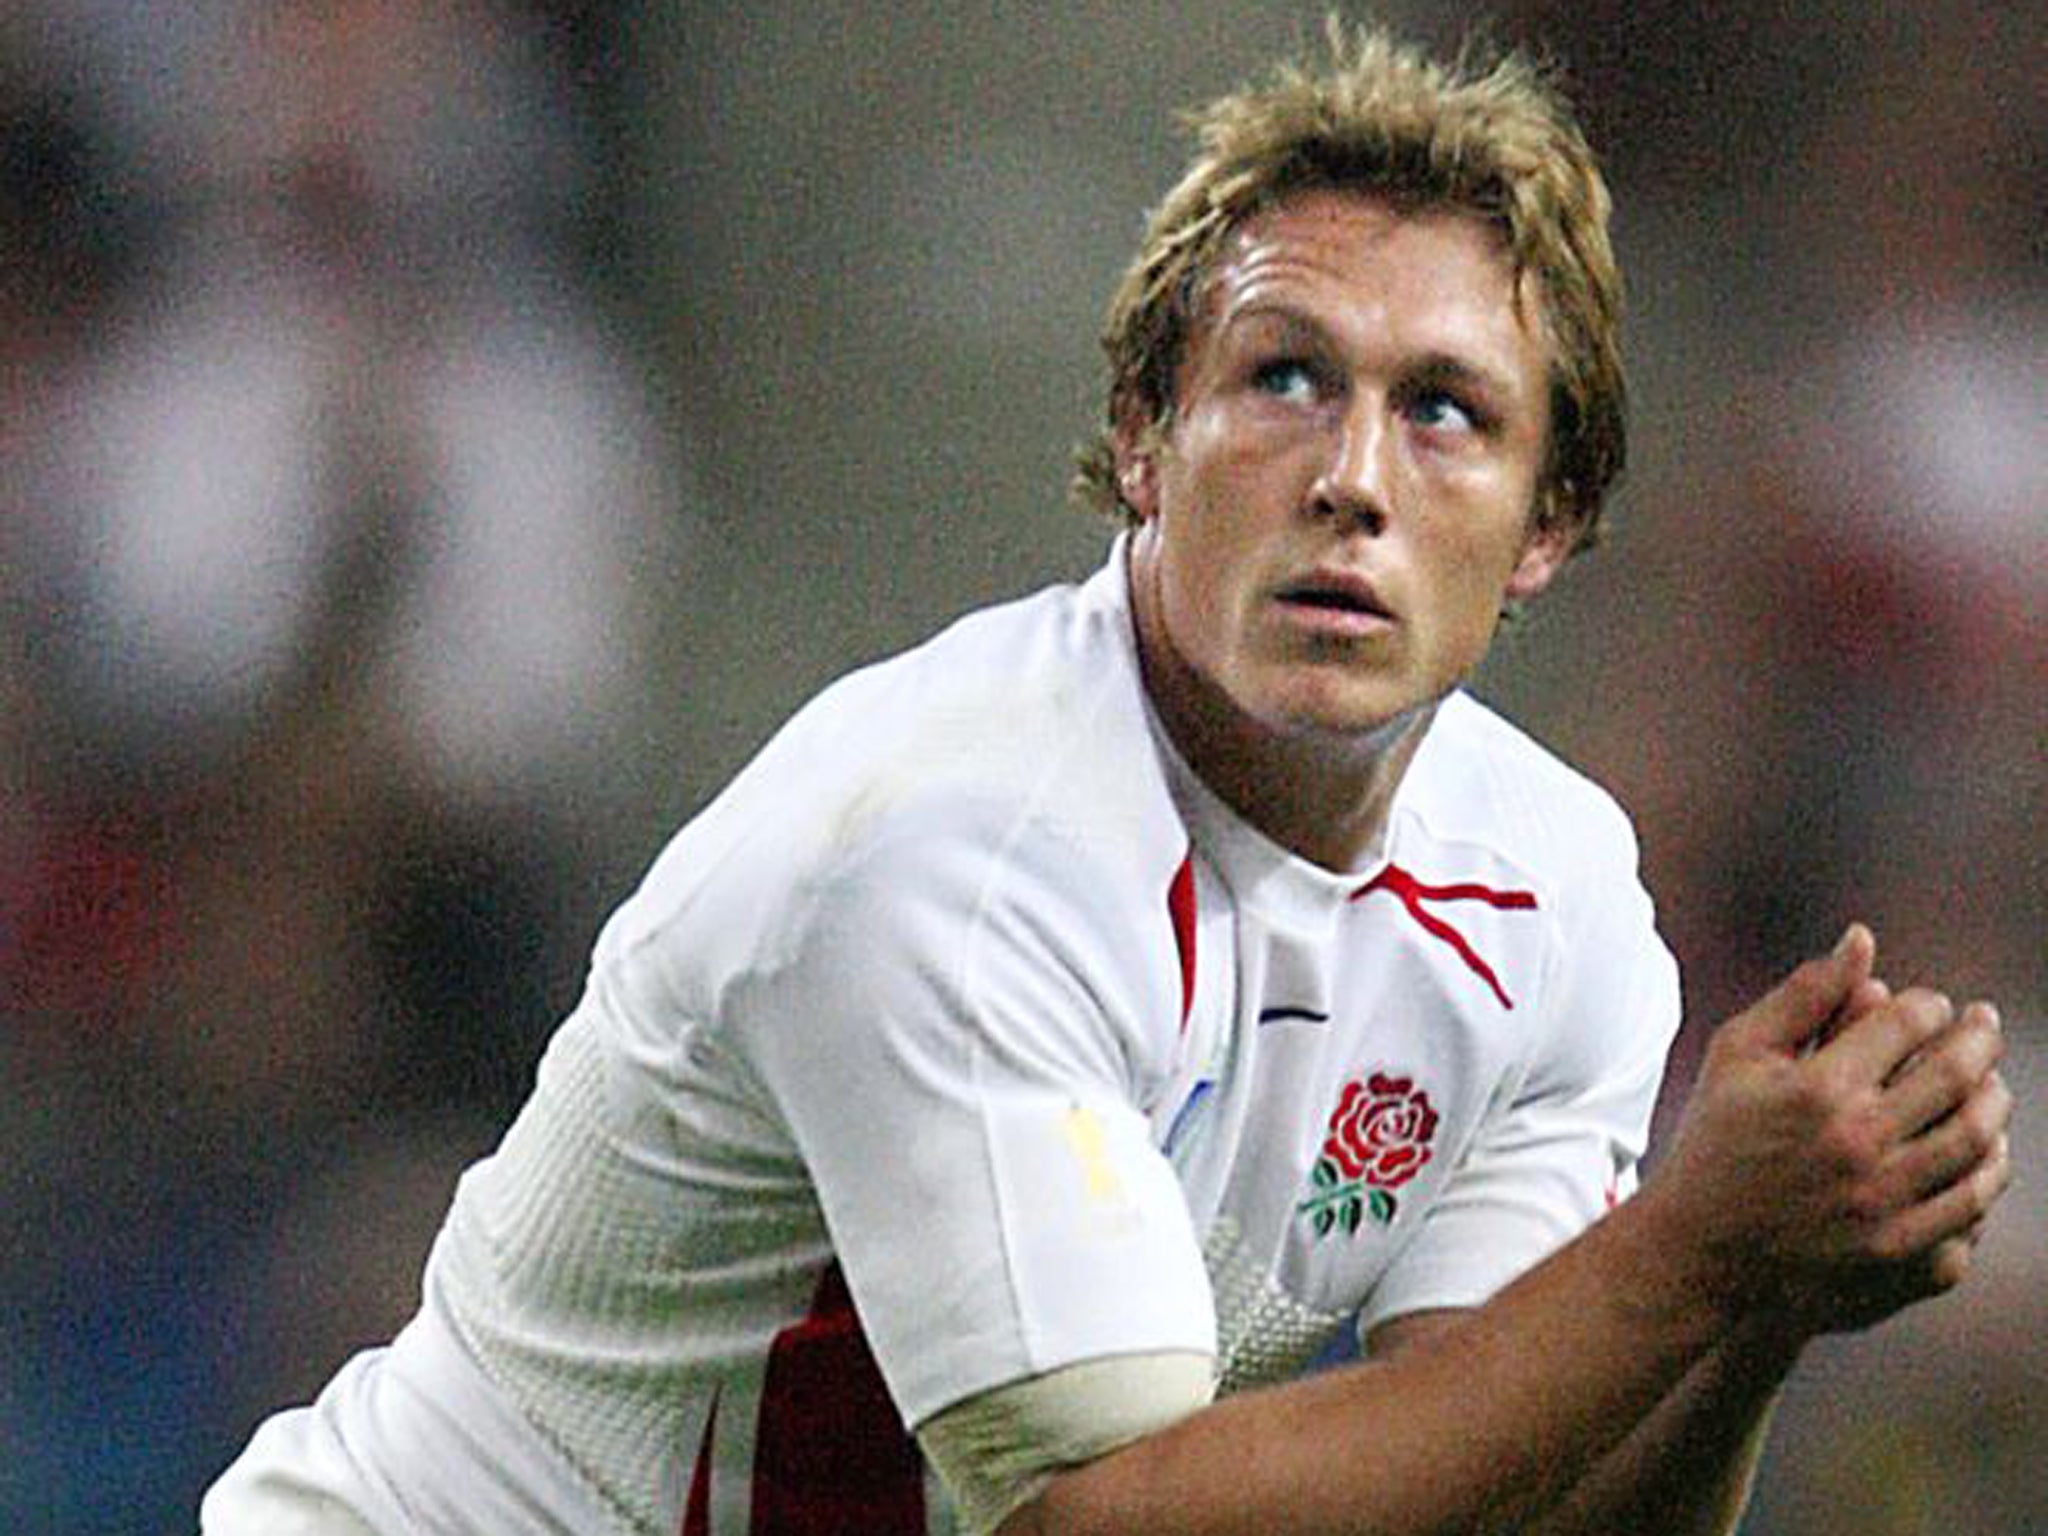 Jonny Wilkinson racked up 1,246 points from 97 Test appearances for England and the Lions